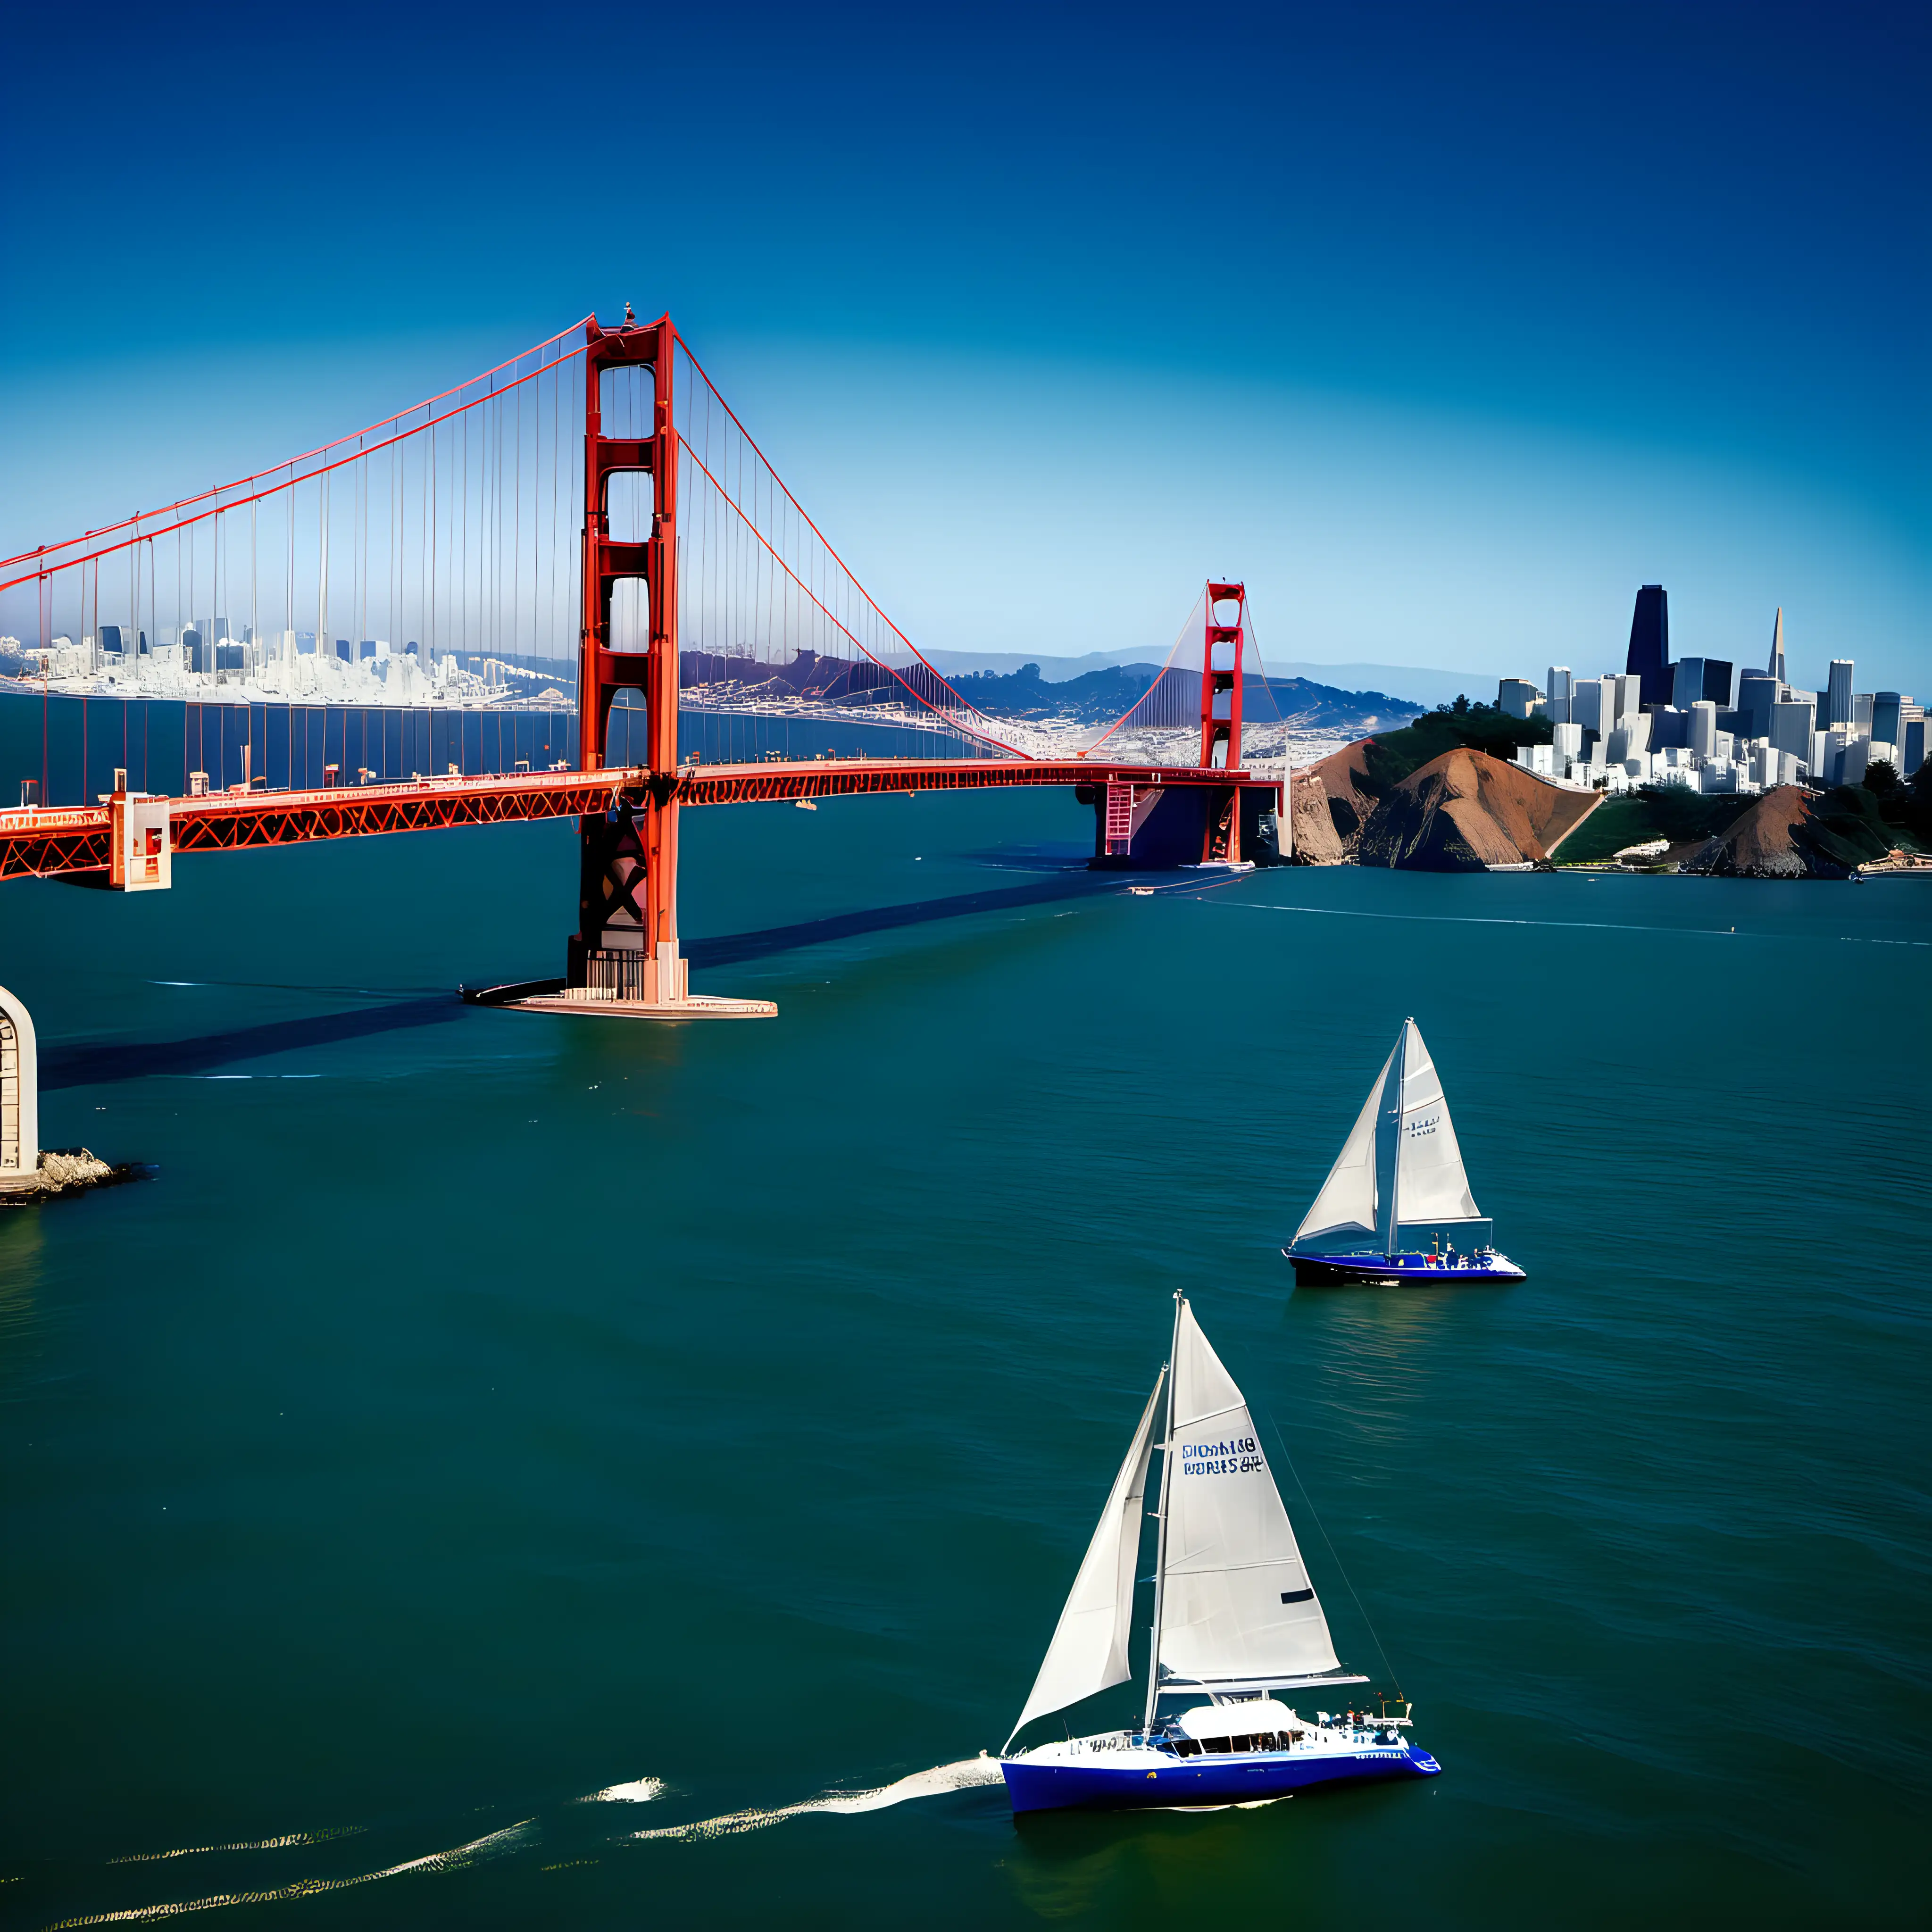 Scenic View of San Francisco Golden Gate Bridge with Sailboat in Rich Blue Waters